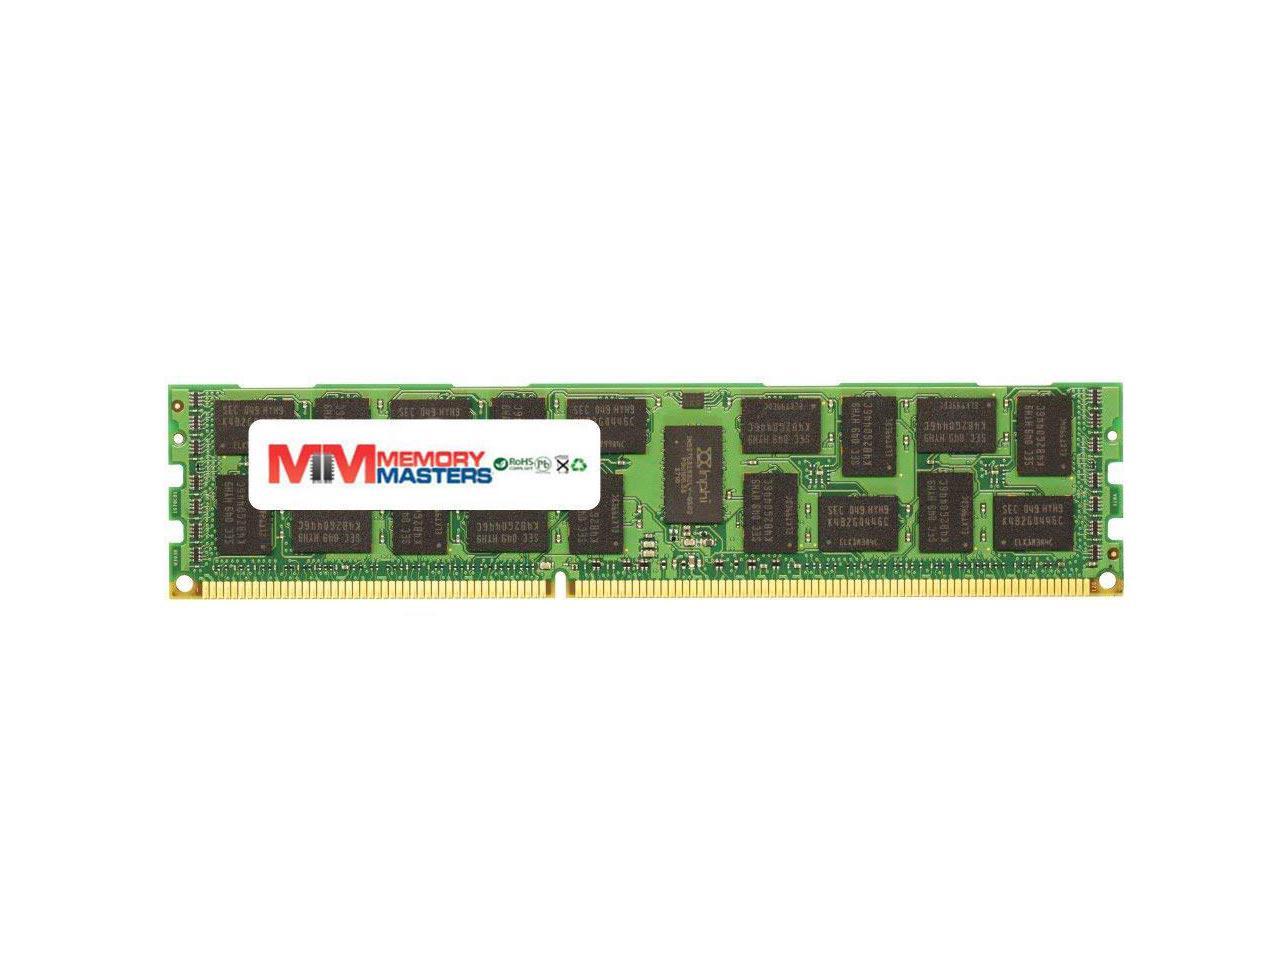 New MemoryMasters NOT for PC/MAC 4GB Memory Module ECC REG PC3-12800 for Dell Compatible PowerVault DL2200